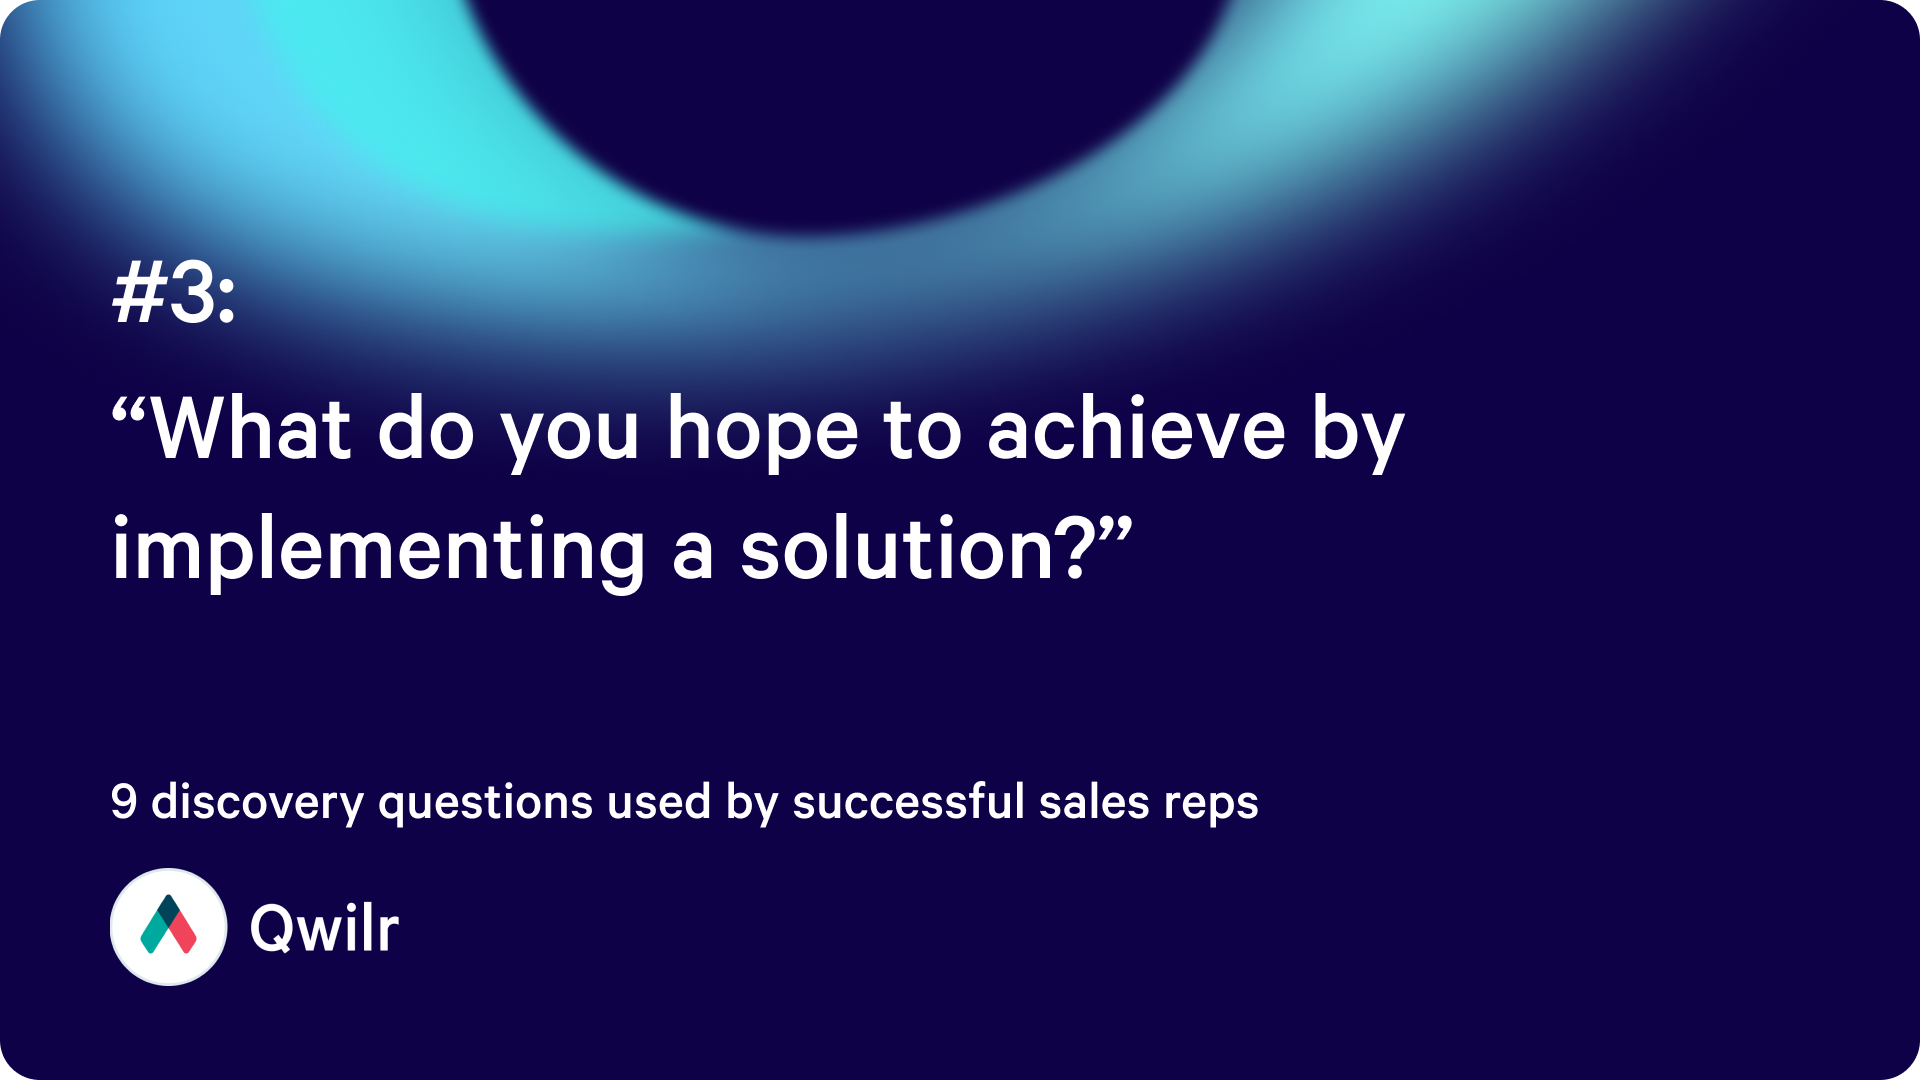 “What do you hope to achieve by implementing a solution?”